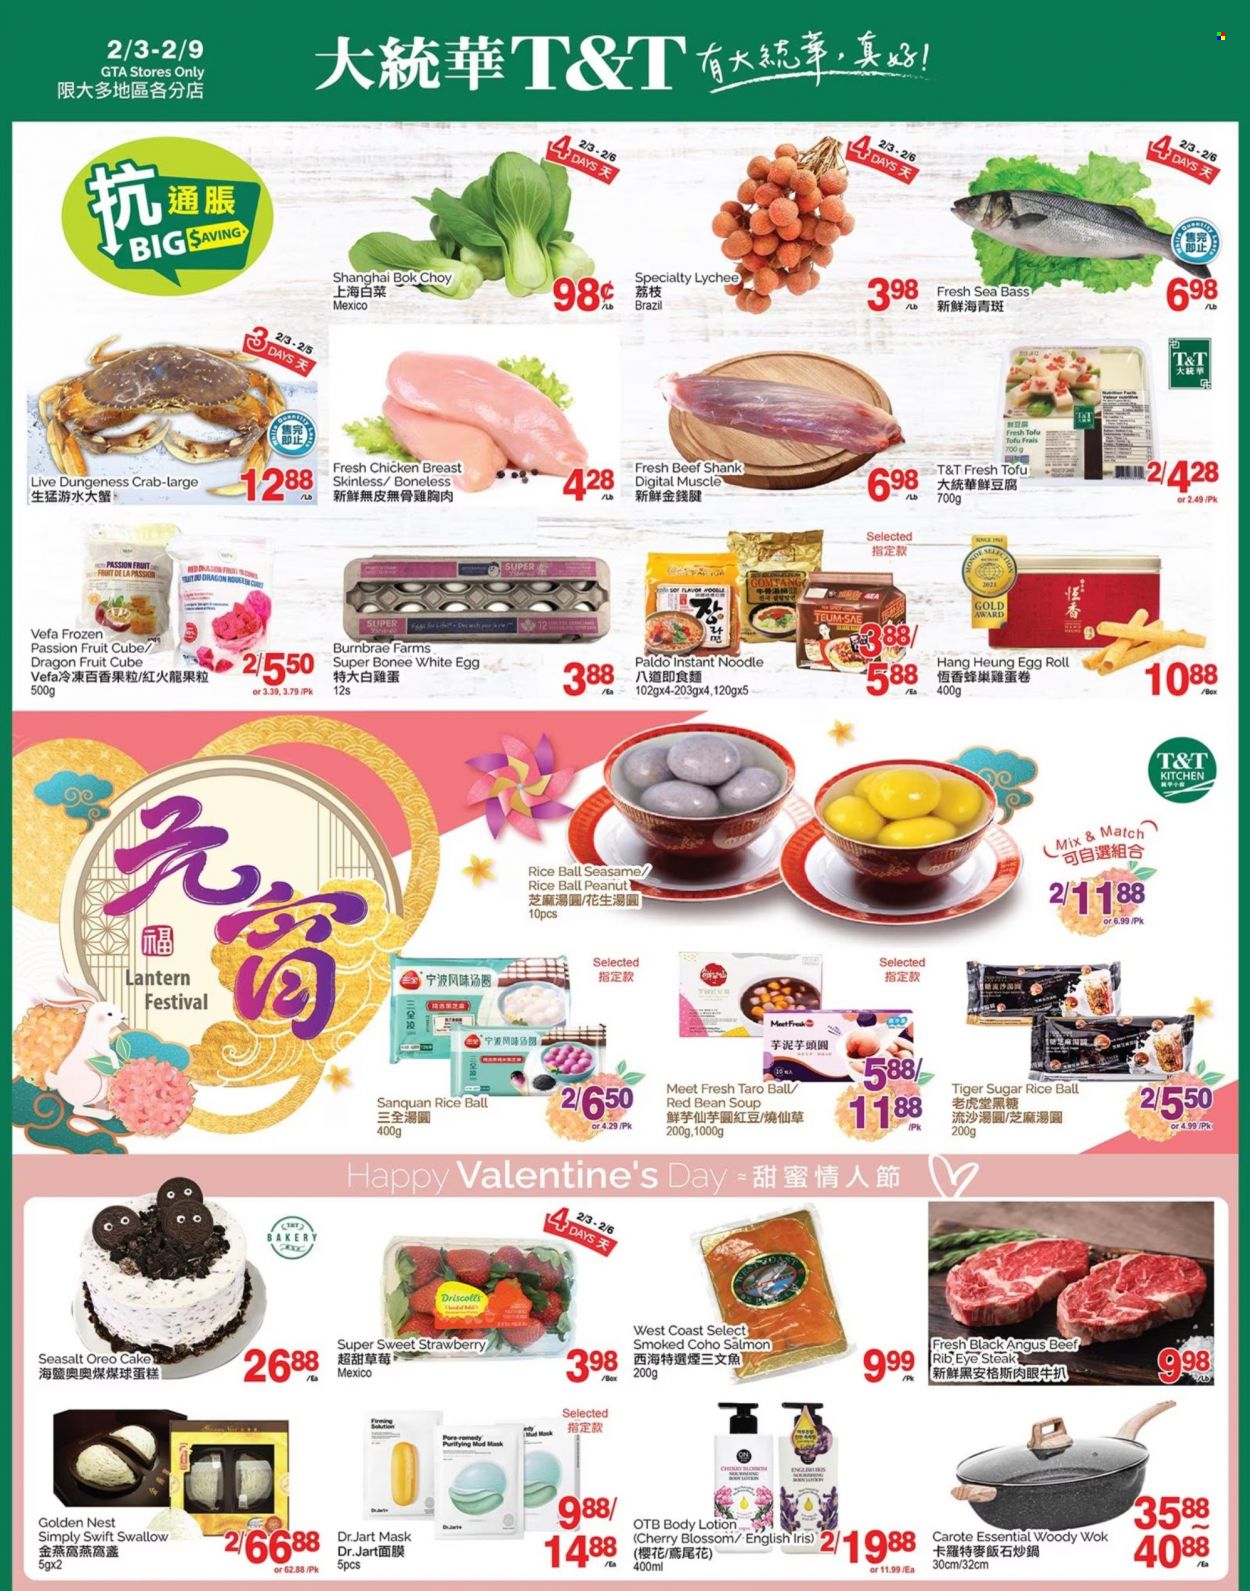 thumbnail - T&T Supermarket Flyer - February 03, 2023 - February 09, 2023 - Sales products - cake, bok choy, lychee, dragon fruit, salmon, sea bass, crab, soup, egg rolls, noodles, tofu, eggs, sugar, sea salt, chicken breasts, chicken, beef meat, beef shank, ribeye steak, body lotion, wok, pin, Oreo, steak. Page 1.